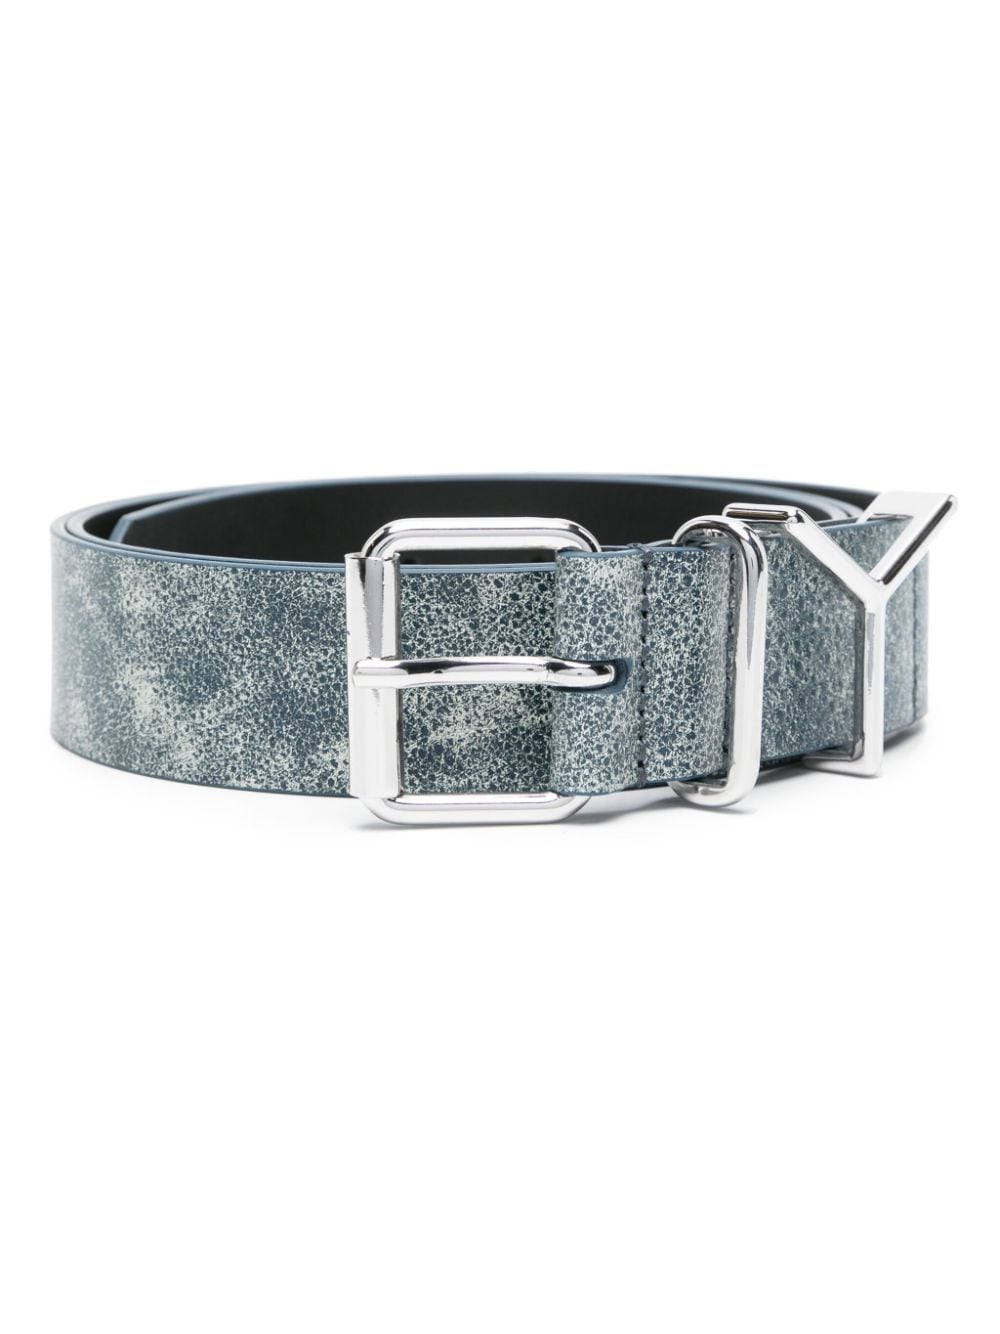 Y/Project Y distressed leather belt - Blue von Y/Project